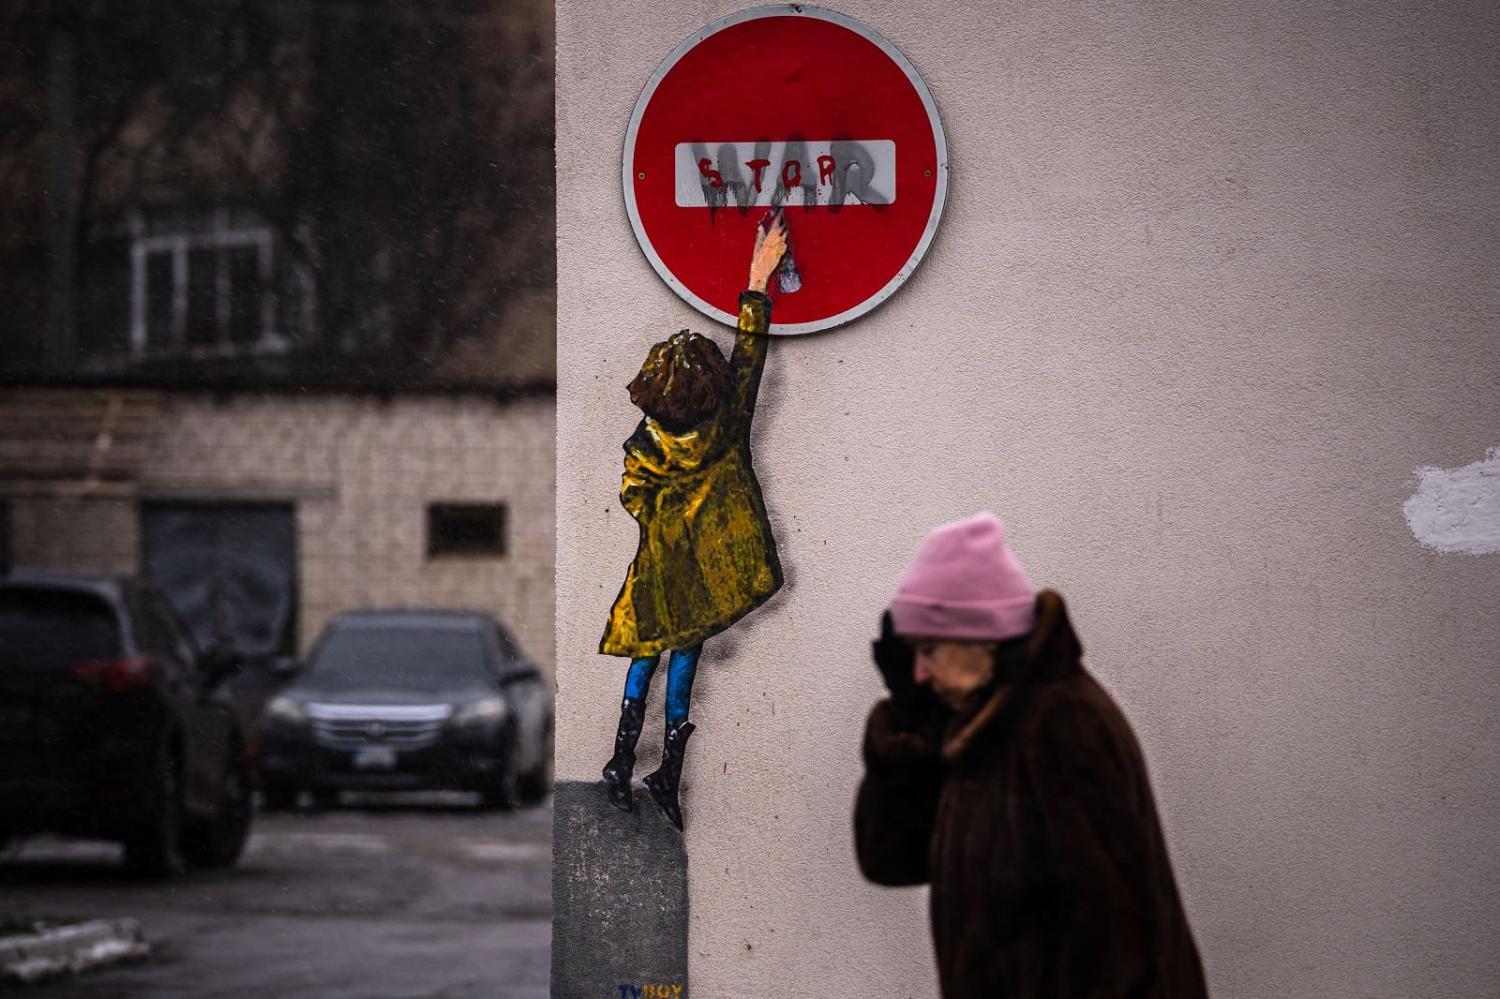 A pedestrian passes a mural of Italian urban artist Tvboy on a wall in Bucha amid the Russian invasion of Ukraine, 1 February 2023 (Dimitar Dilkoff/AFP via Getty Images)